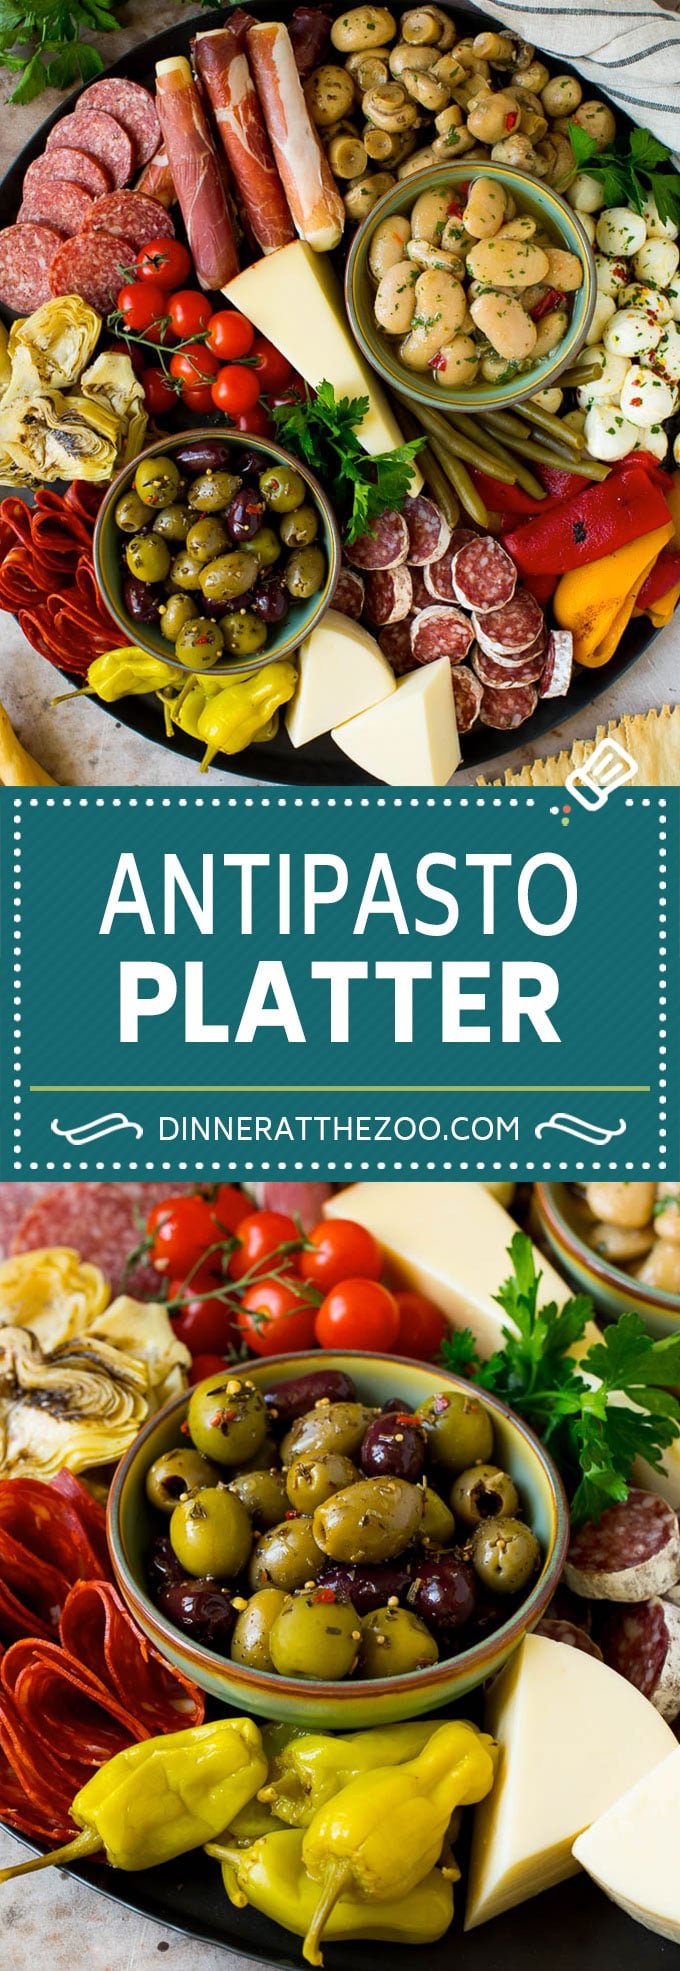 This antipasto platter is a combination of Italian meats, cheeses, vegetables and breads, all arranged to create a fabulous appetizer display.